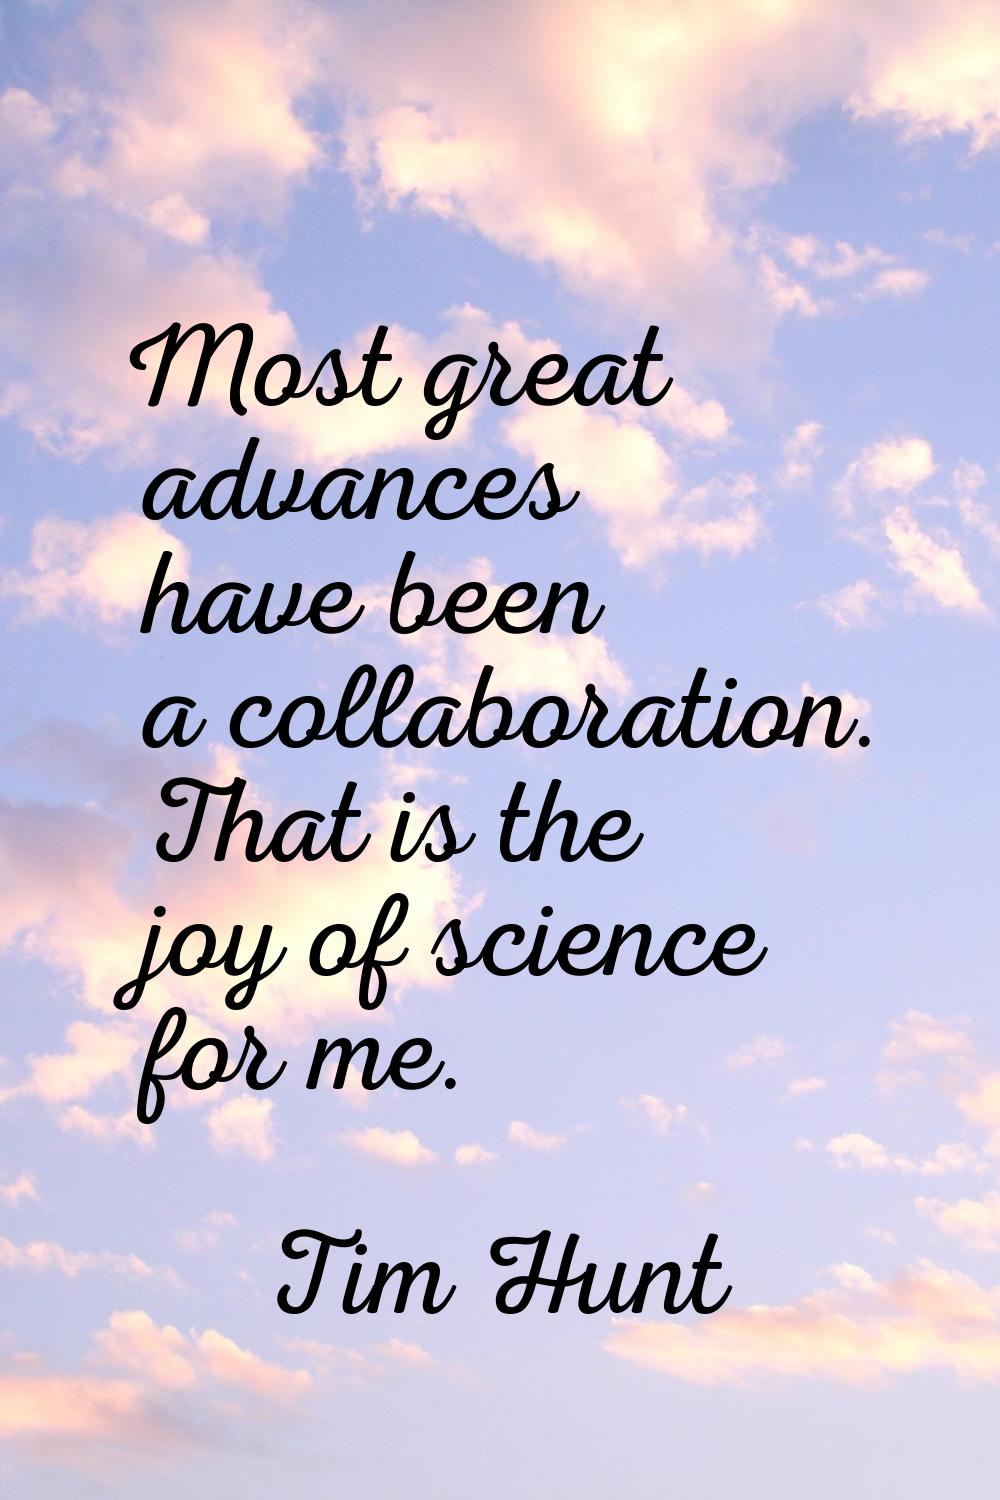 Most great advances have been a collaboration. That is the joy of science for me.